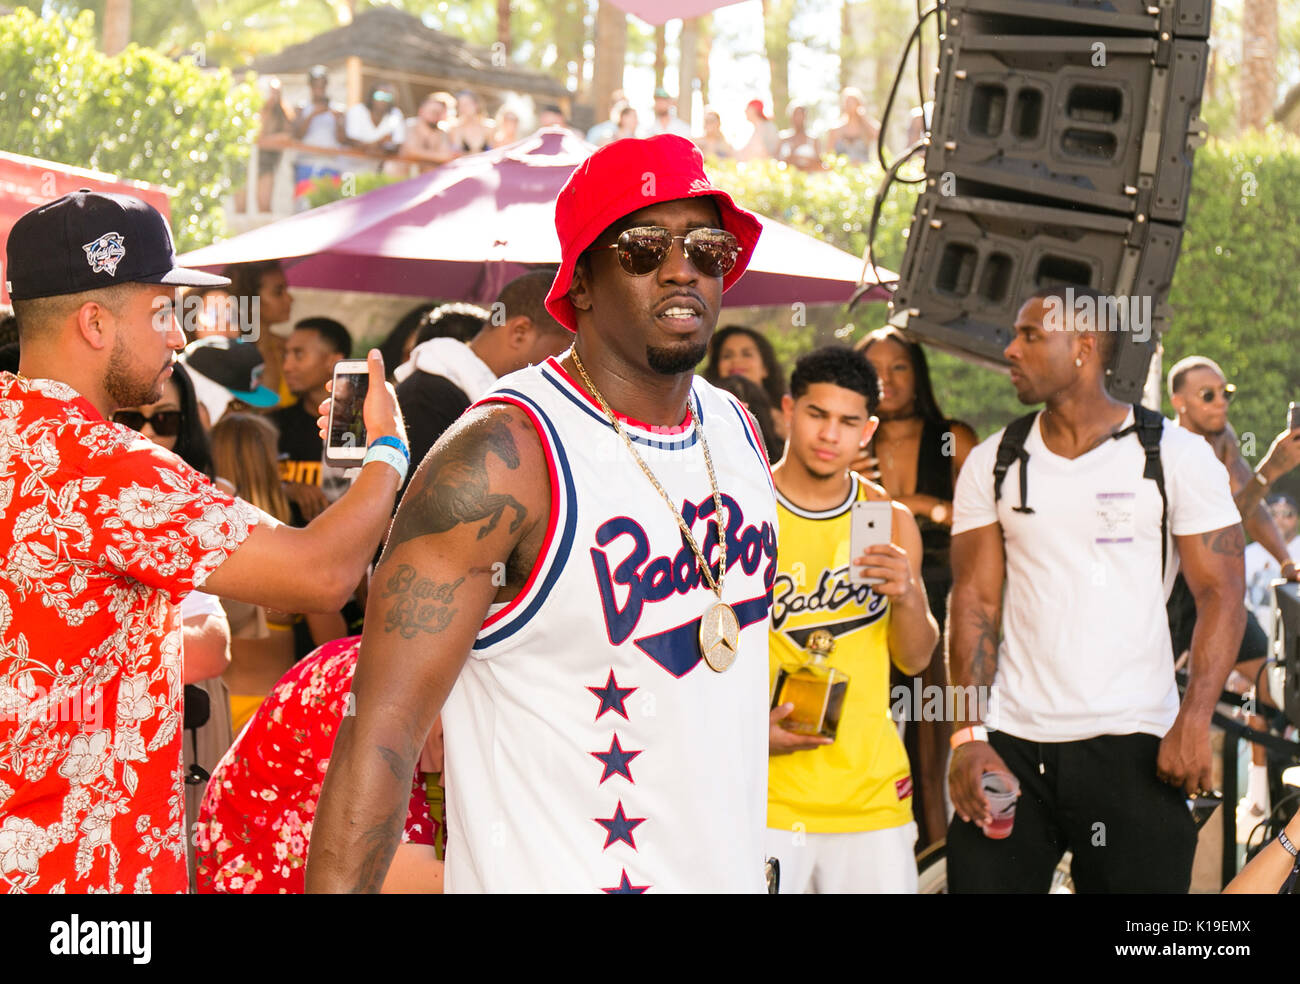 Sean 'Diddy' Combs AKA Puff Daddy hosts a Pre-Fight Party at REHAB Pool  Party at Hard Rock Hotel & Casino in Las vegas, NV on august 26, 2017.  Credit: Erik Kabik Photography/Media